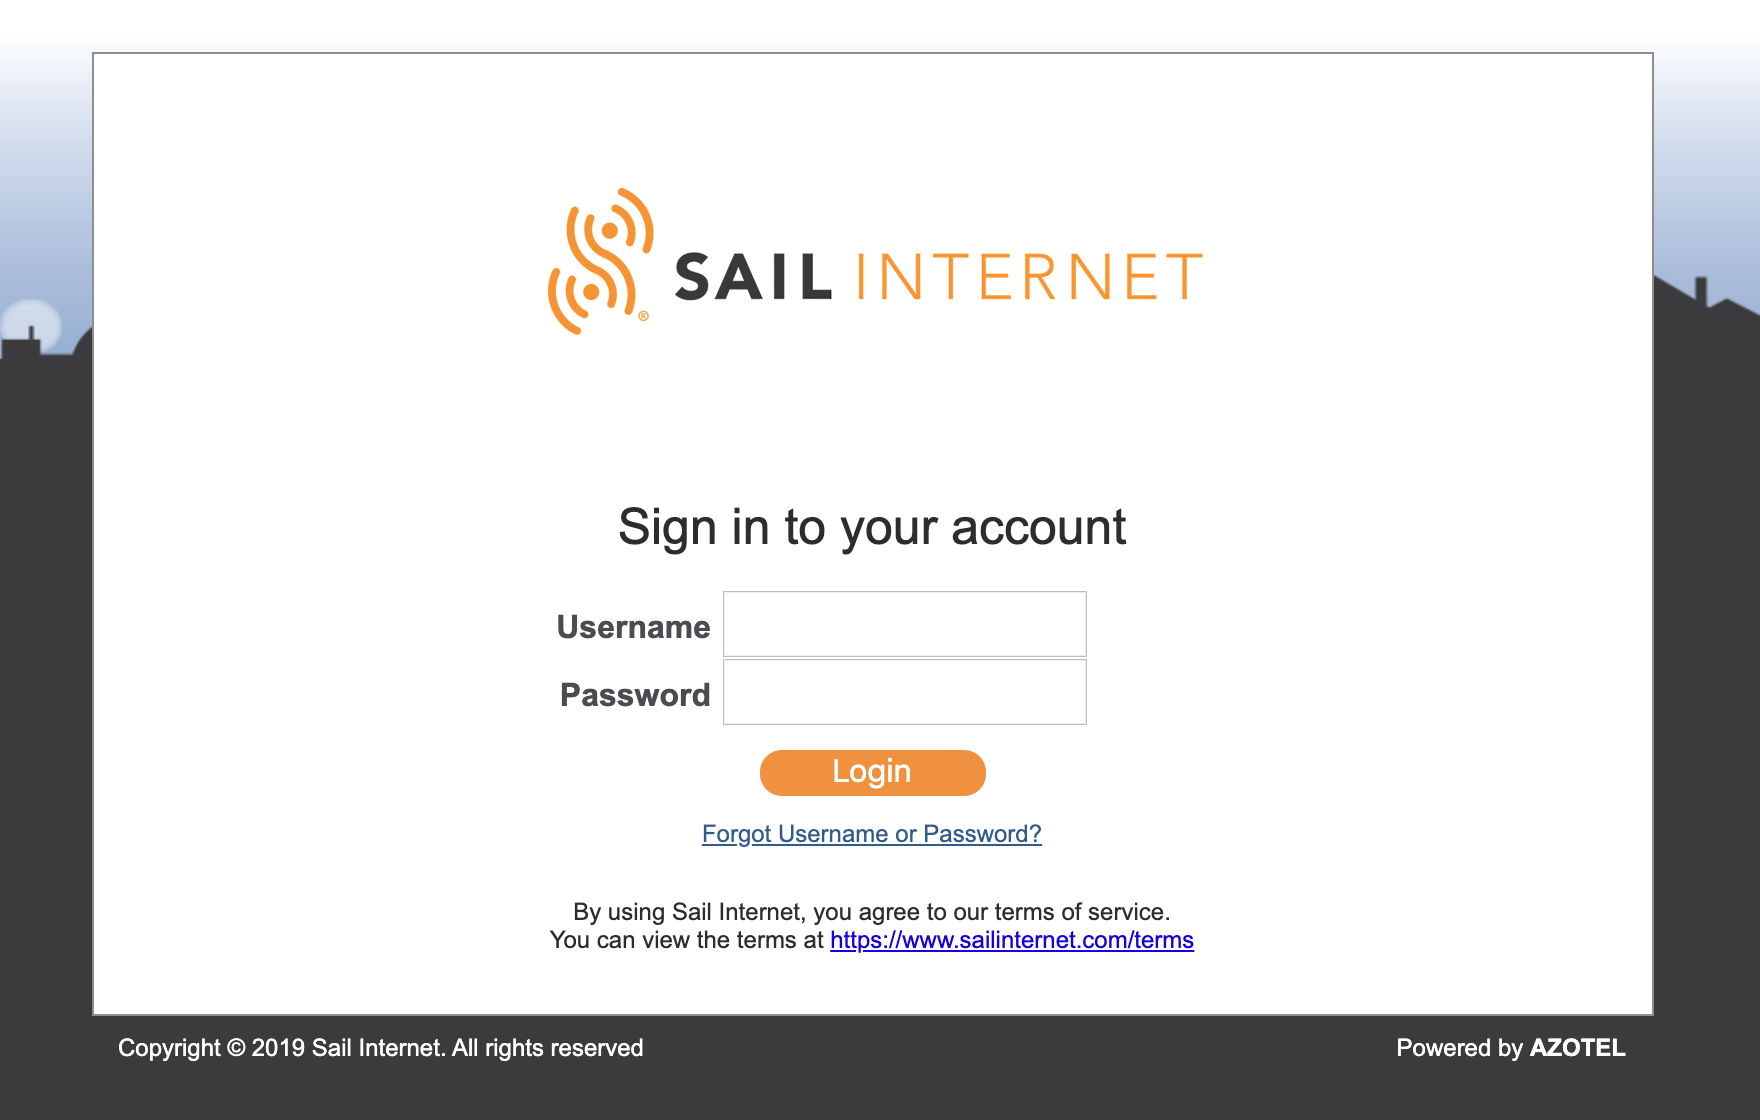 Sail Internet: The Future of High-Speed, Reliable, and Affordable Internet Connectivity